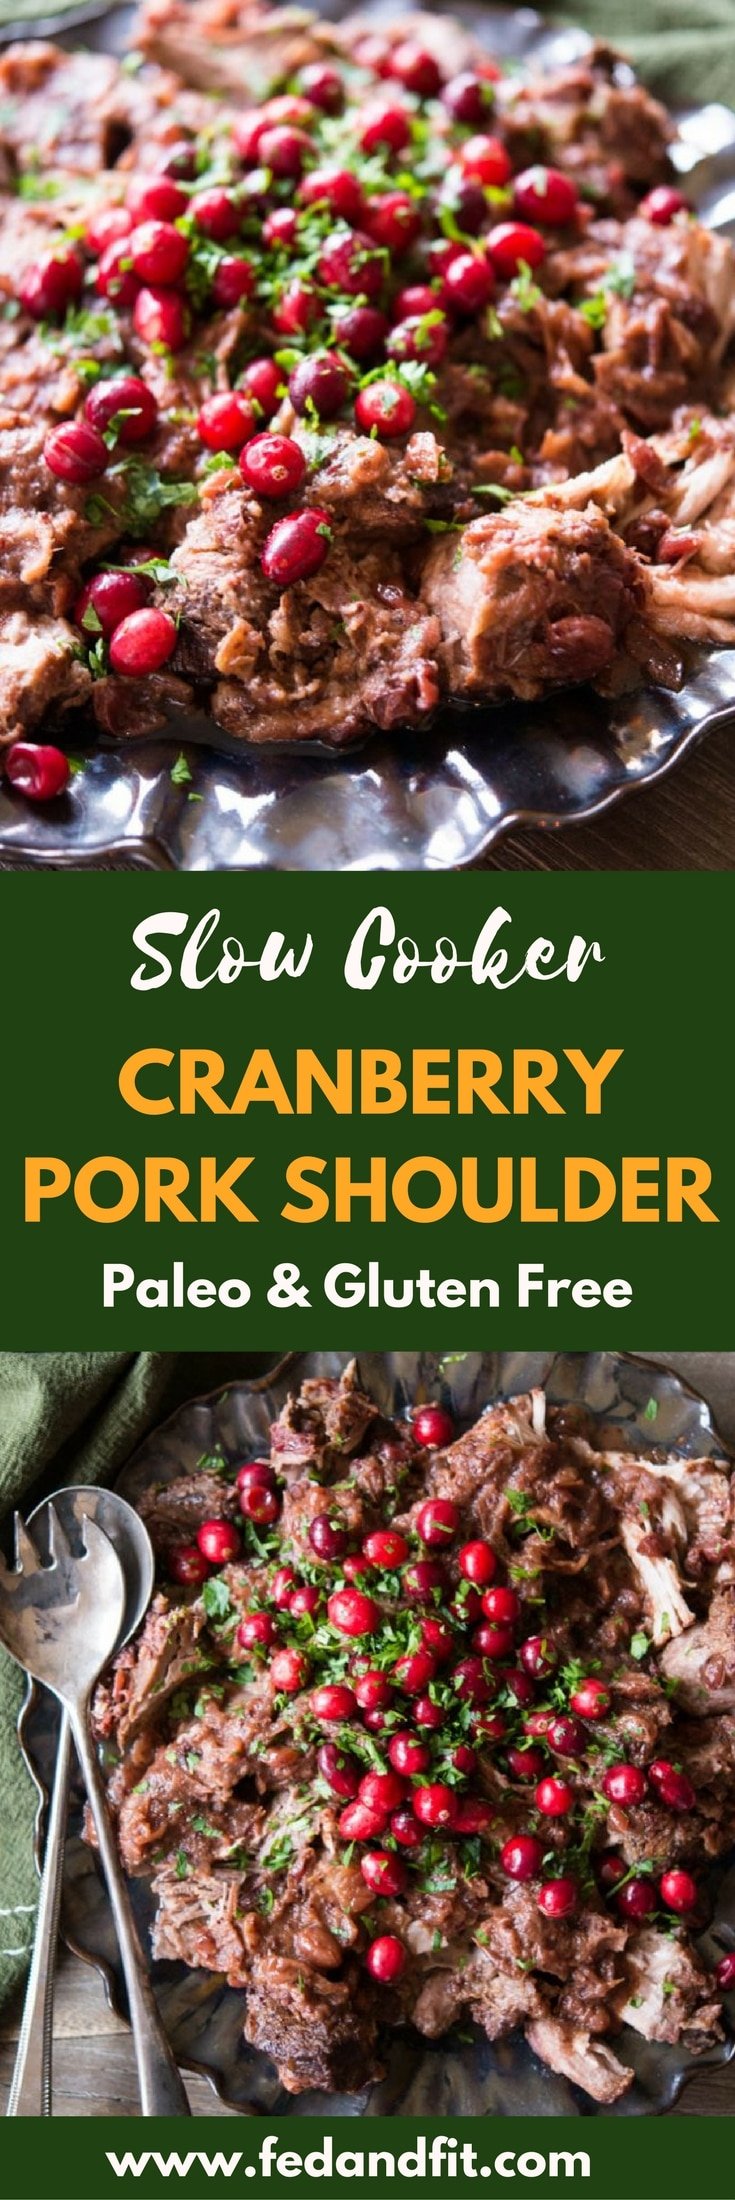 Not sure what to do with all that leftover cranberry sauce and feeling tired of cooking? Cranberry pork shoulder is the perfect meal that you can throw into the slow cooker that results in a flavorful shredded pork roast.